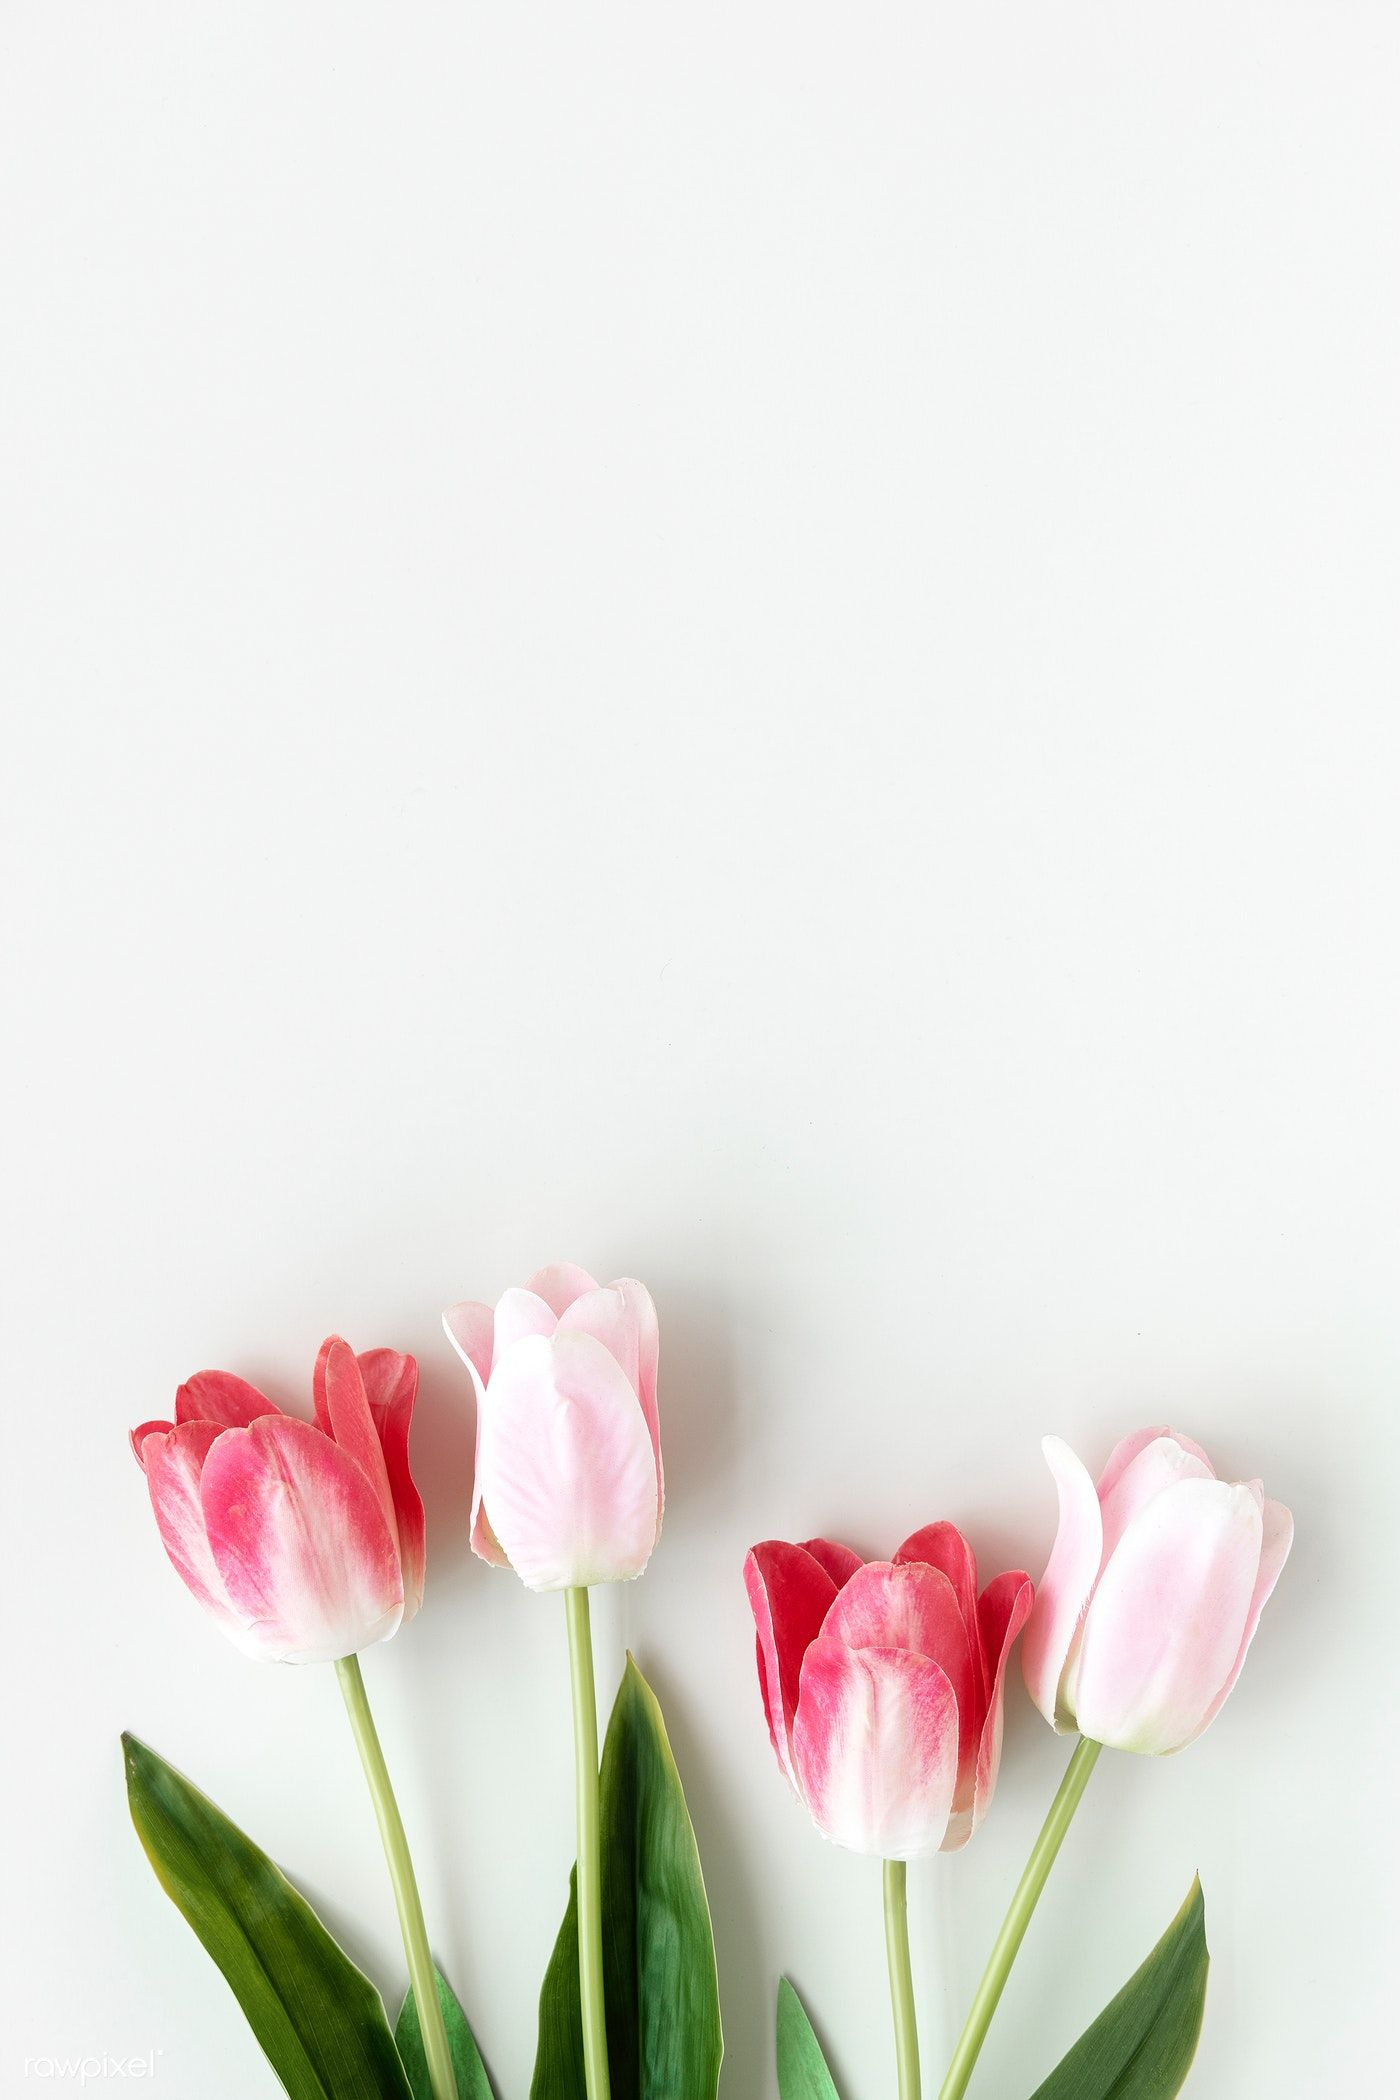 1400x2100 Pink tulips on blank white background template | premium image by / Ake | Flower background design, Flower frame, Flower background wallpaper